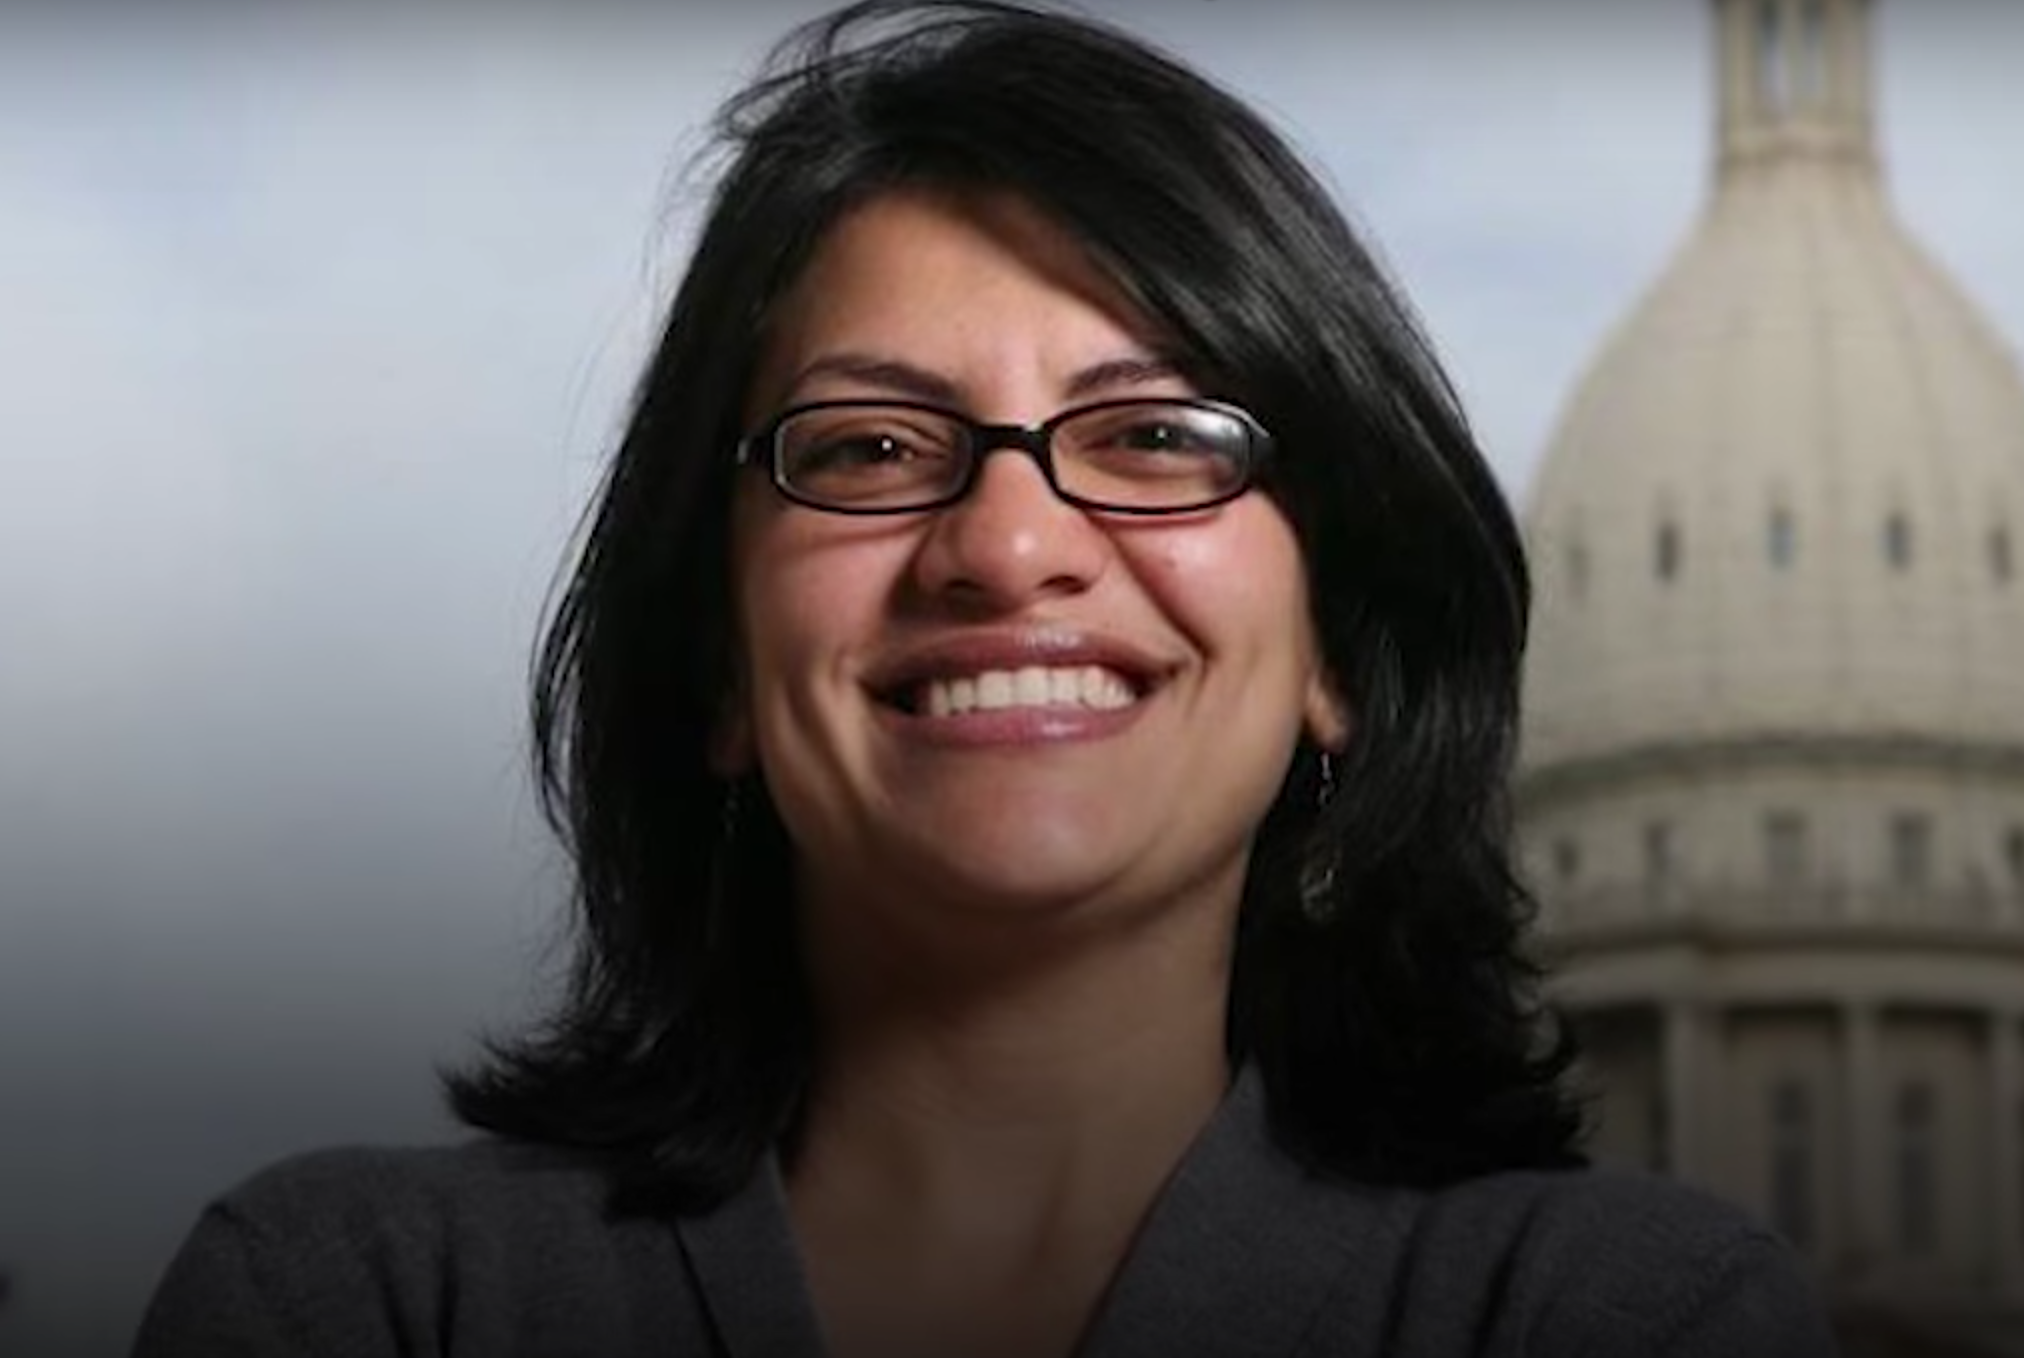 Rashida Tlaib Is Likely To Become The First Muslim American Woman In Congress Asamnews 9011